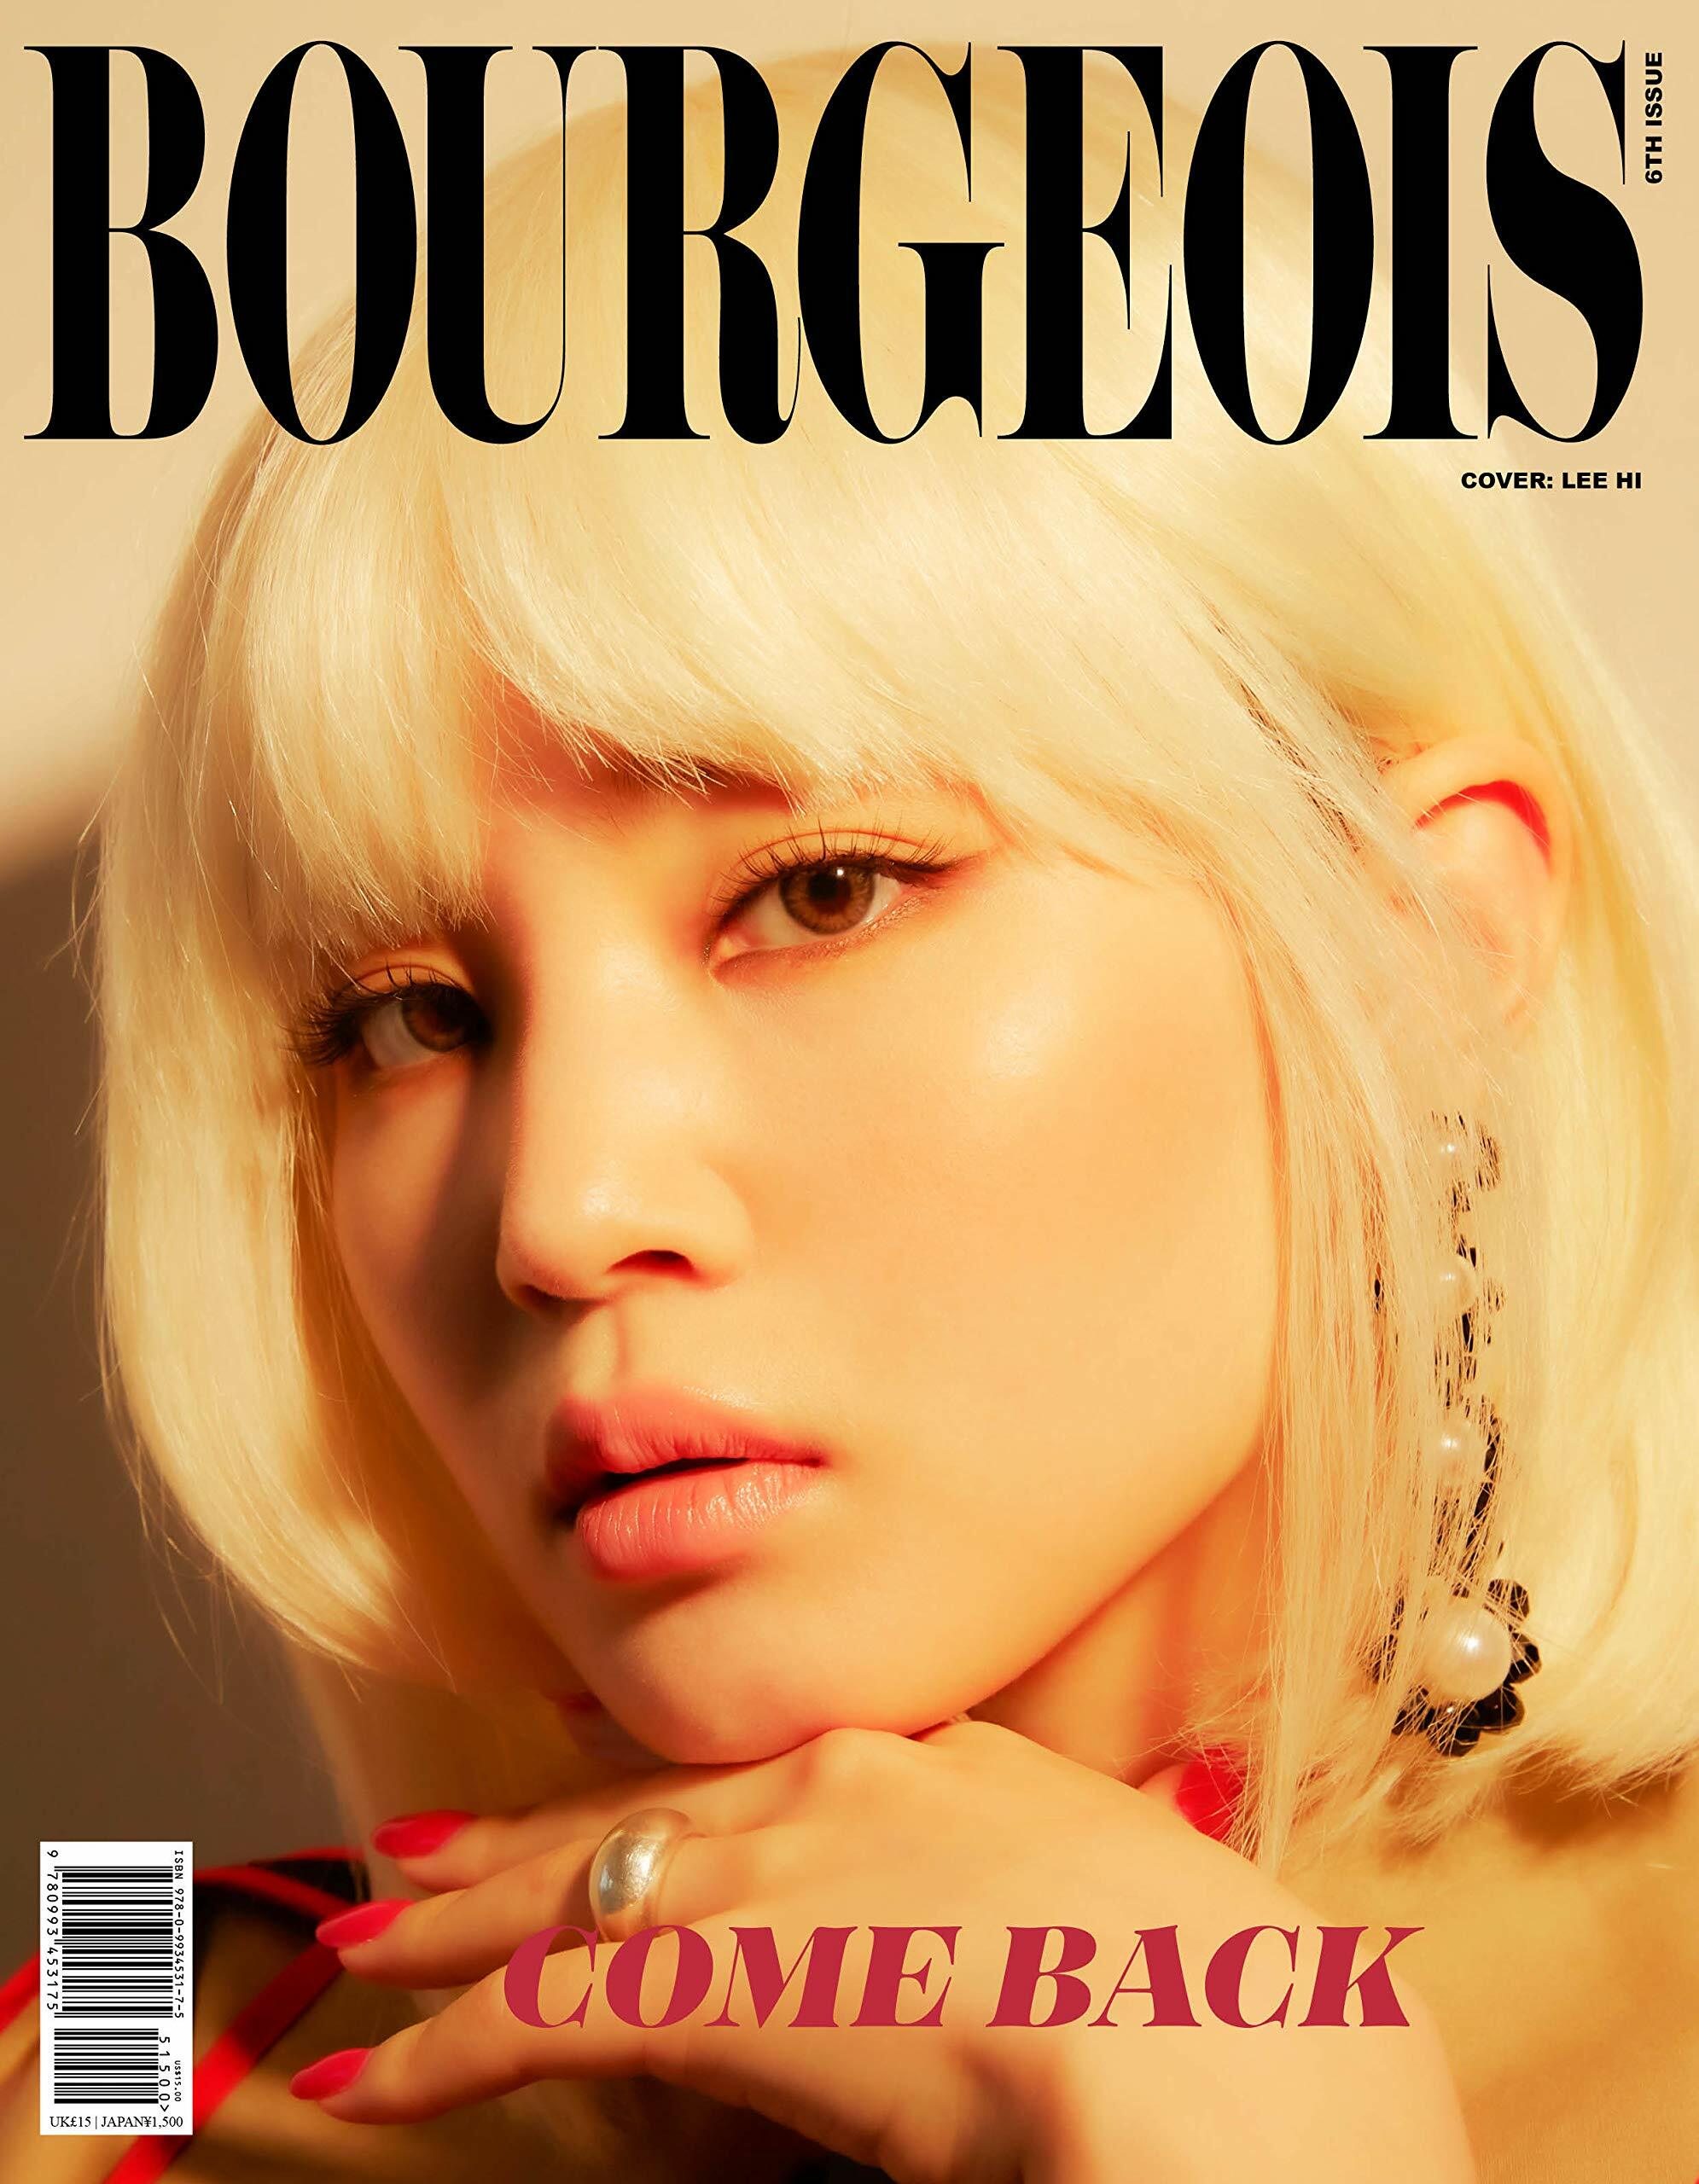 BOURGEOIS 6TH ISSUE: COME BACK (英語)